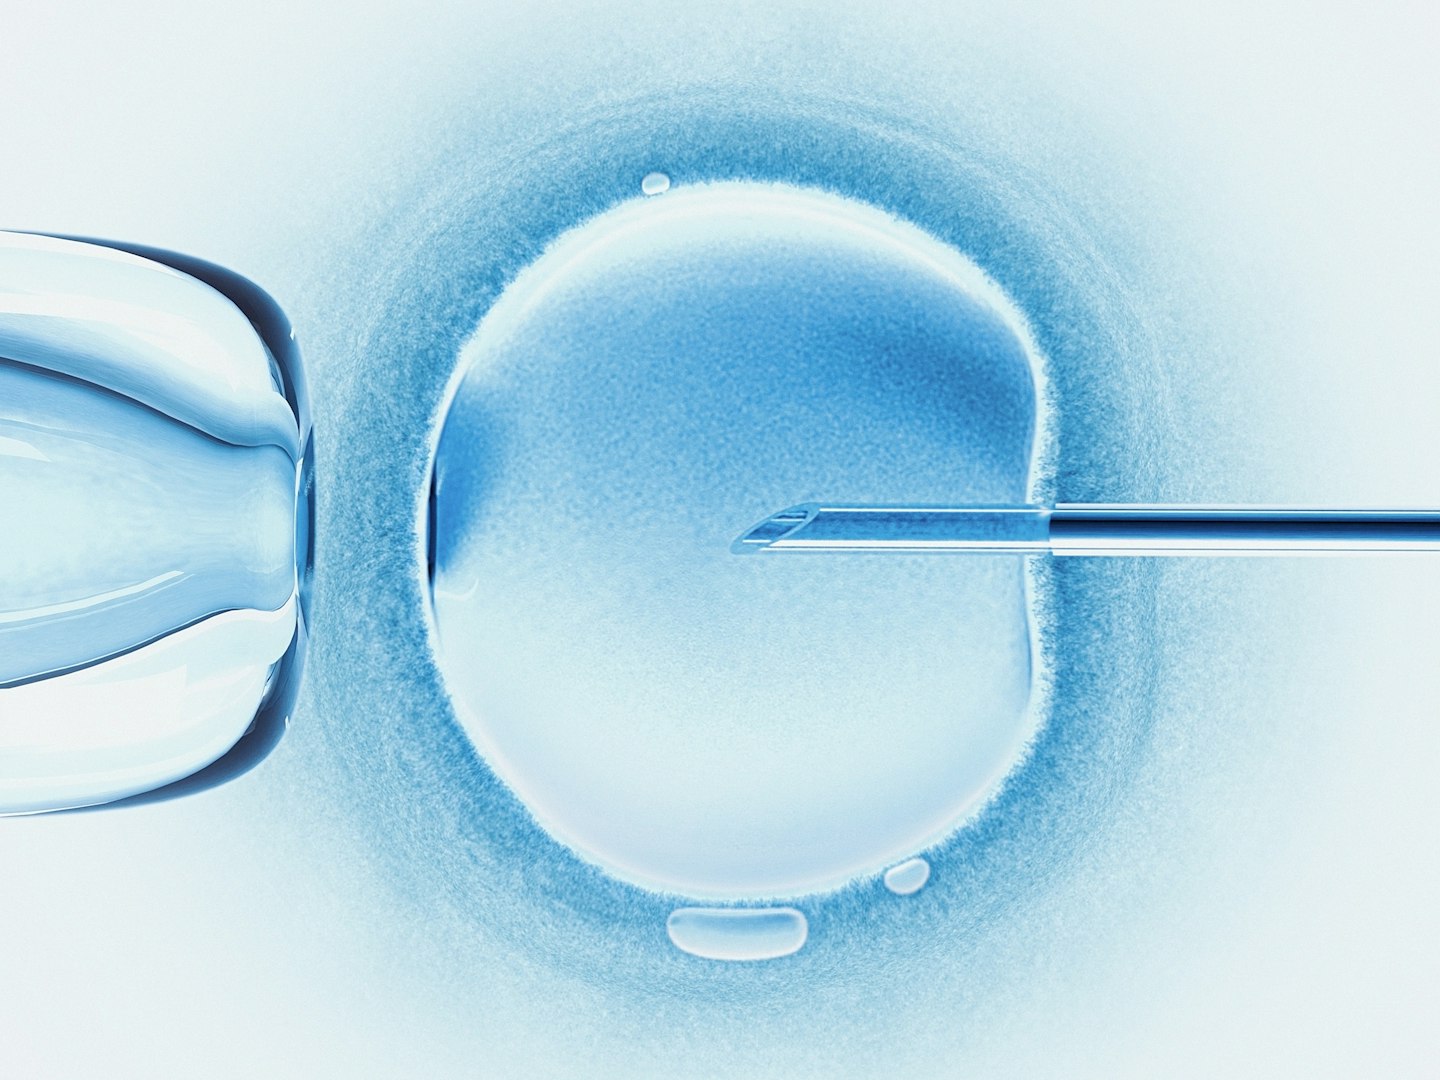 Result of Fertility treatments